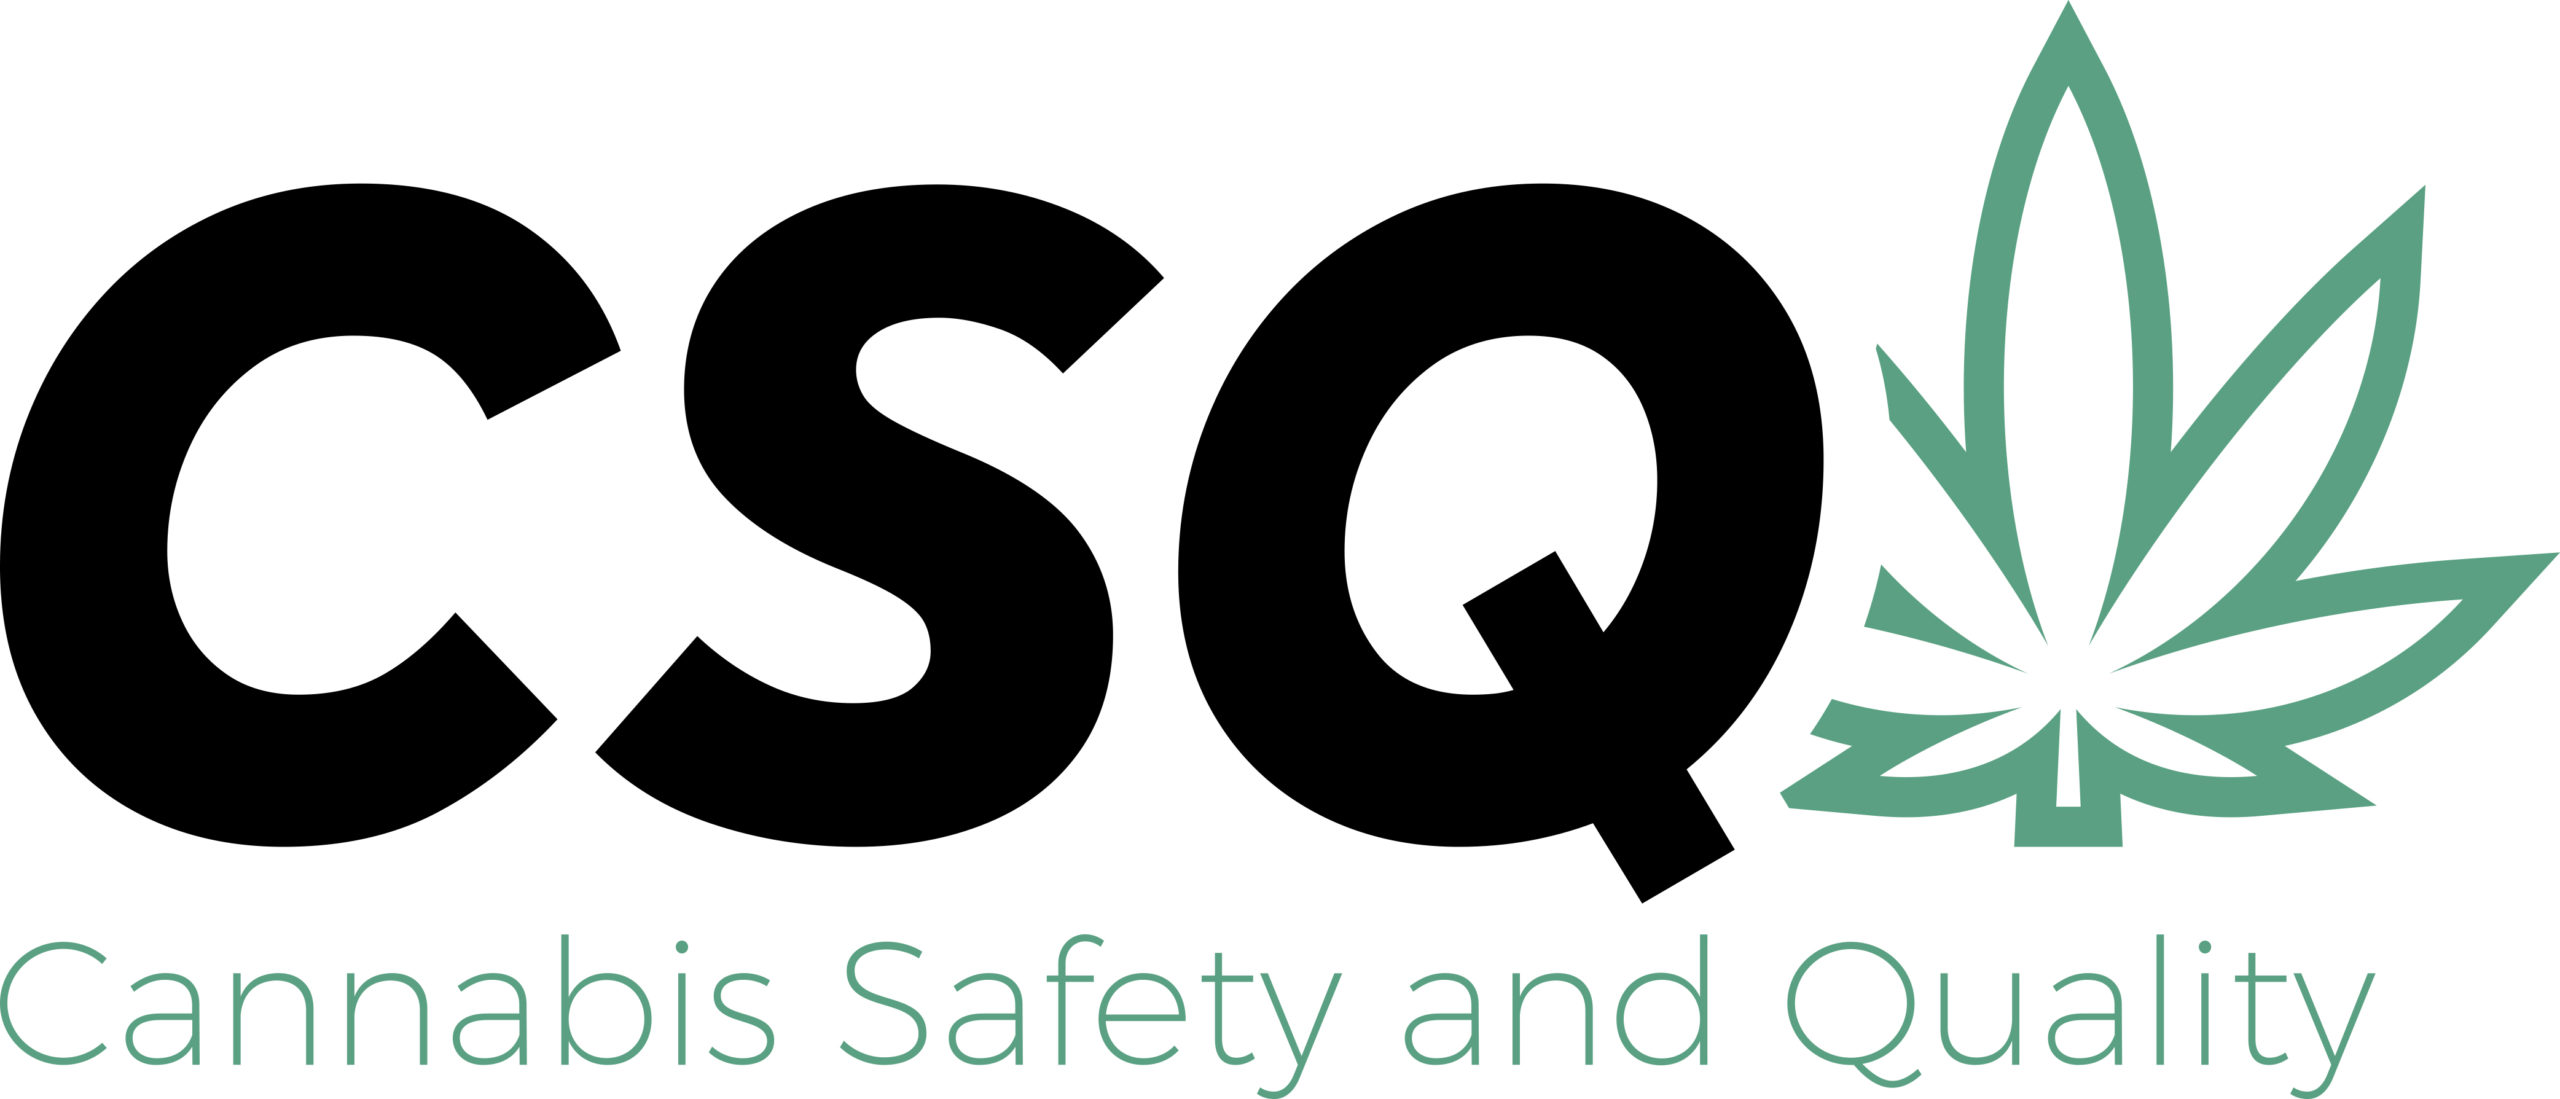 Cannabis Safety & Quality Certificate and tyler williams interview regulation certified